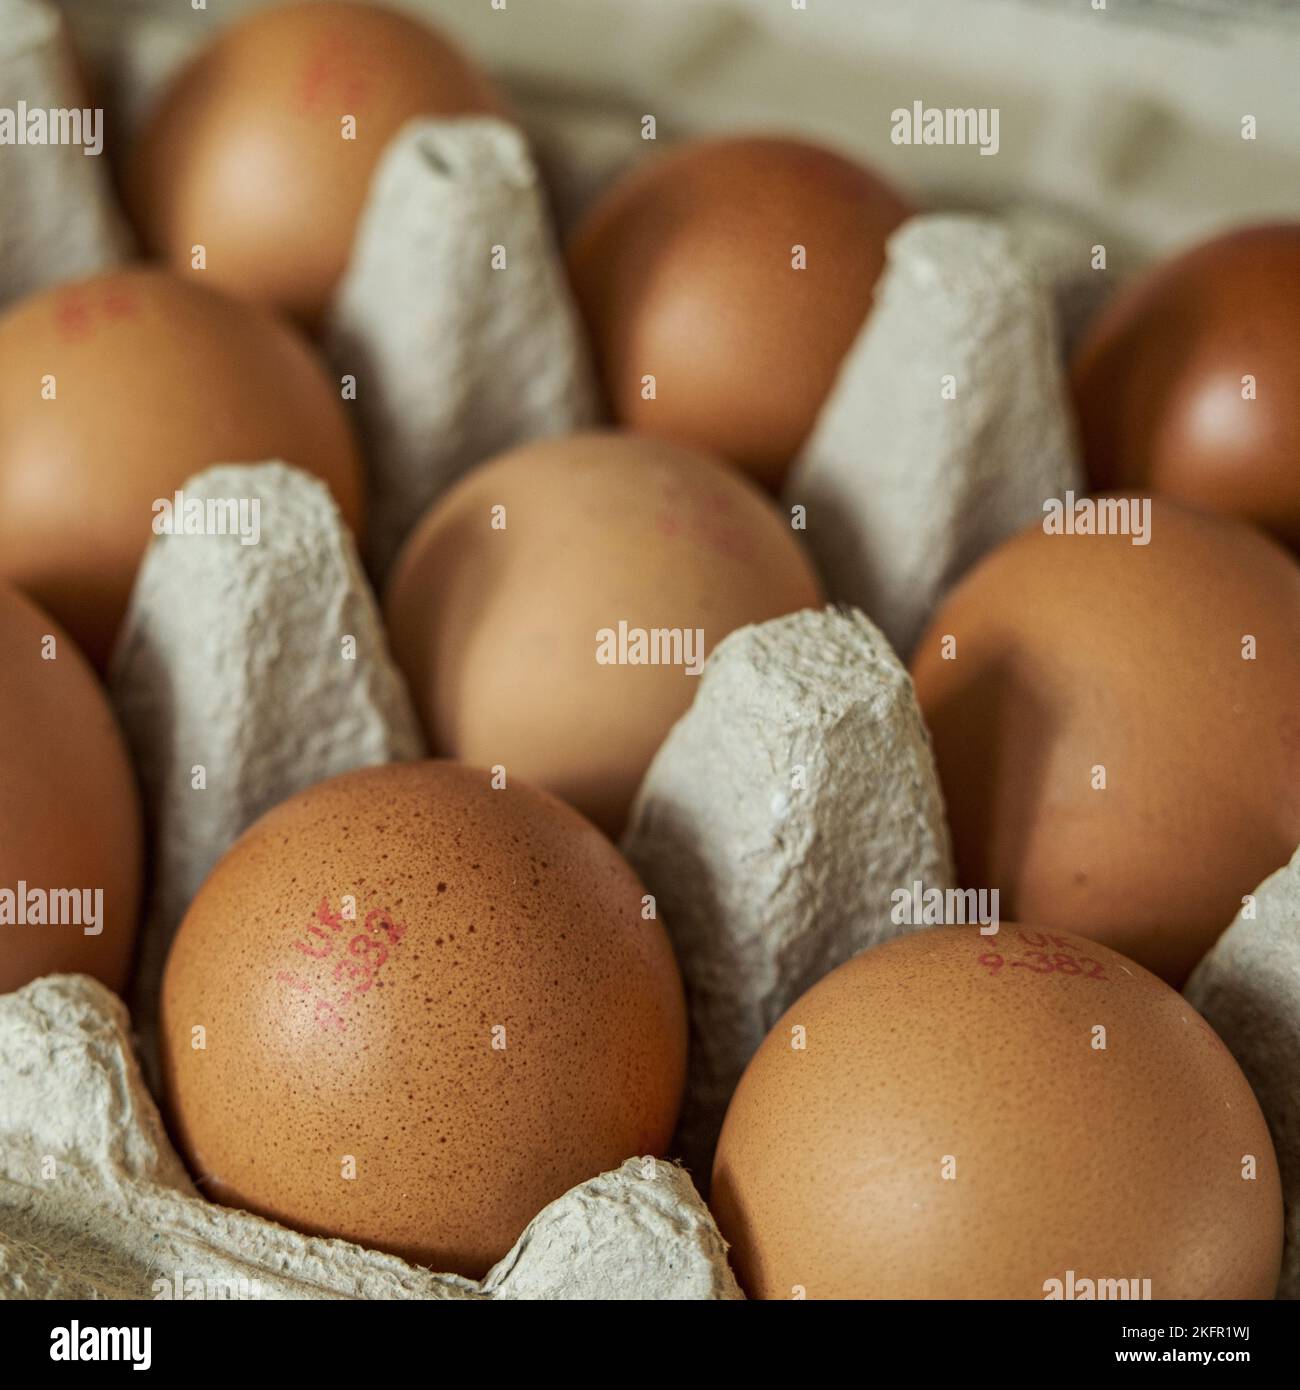 London UK, November 16 2022, Box Or Carton Of Whole Uncooked Fresh Brown Hens Eggs With No People Stock Photo